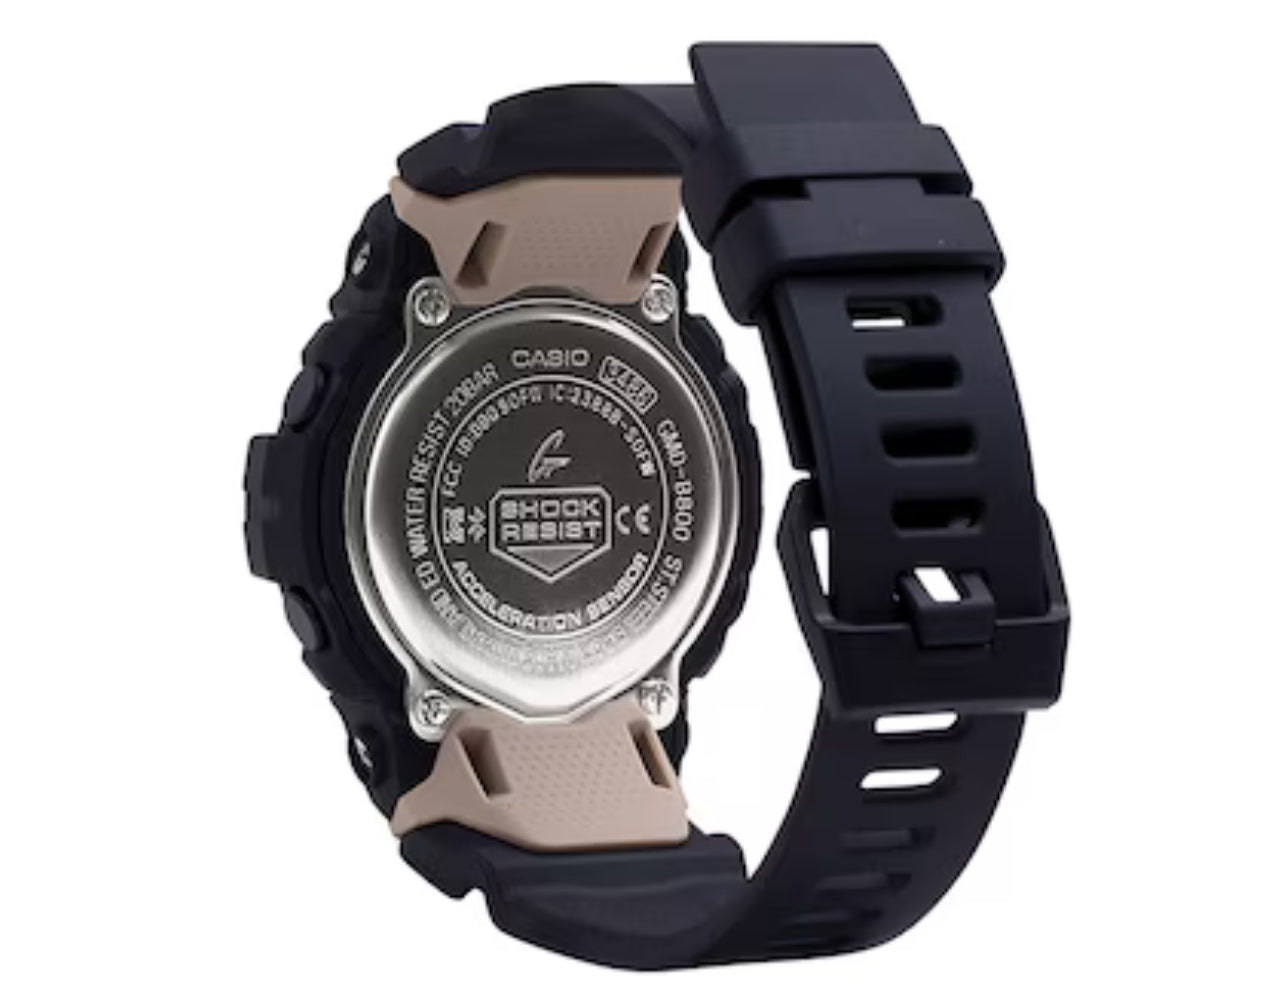 Ladies' Casio G-Shock S Series Black Strap Watch with Rose-Tone Dial